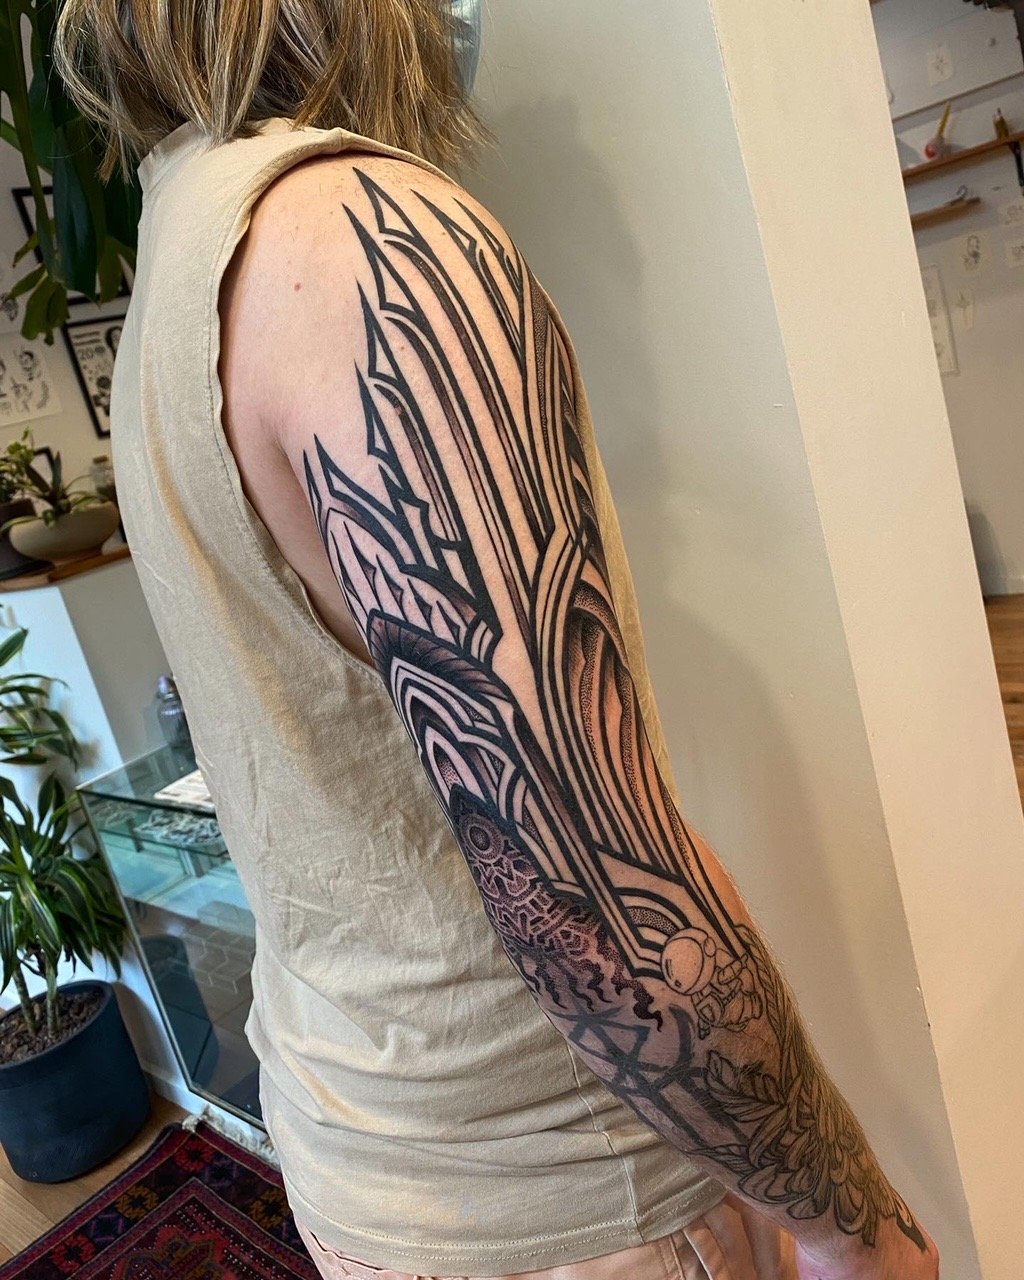 12 years old Wanting to reworkcover up and finish my half sleeve Any  ideas on how to reworkcover this up while adding the inner arm and rest of  the arm to the